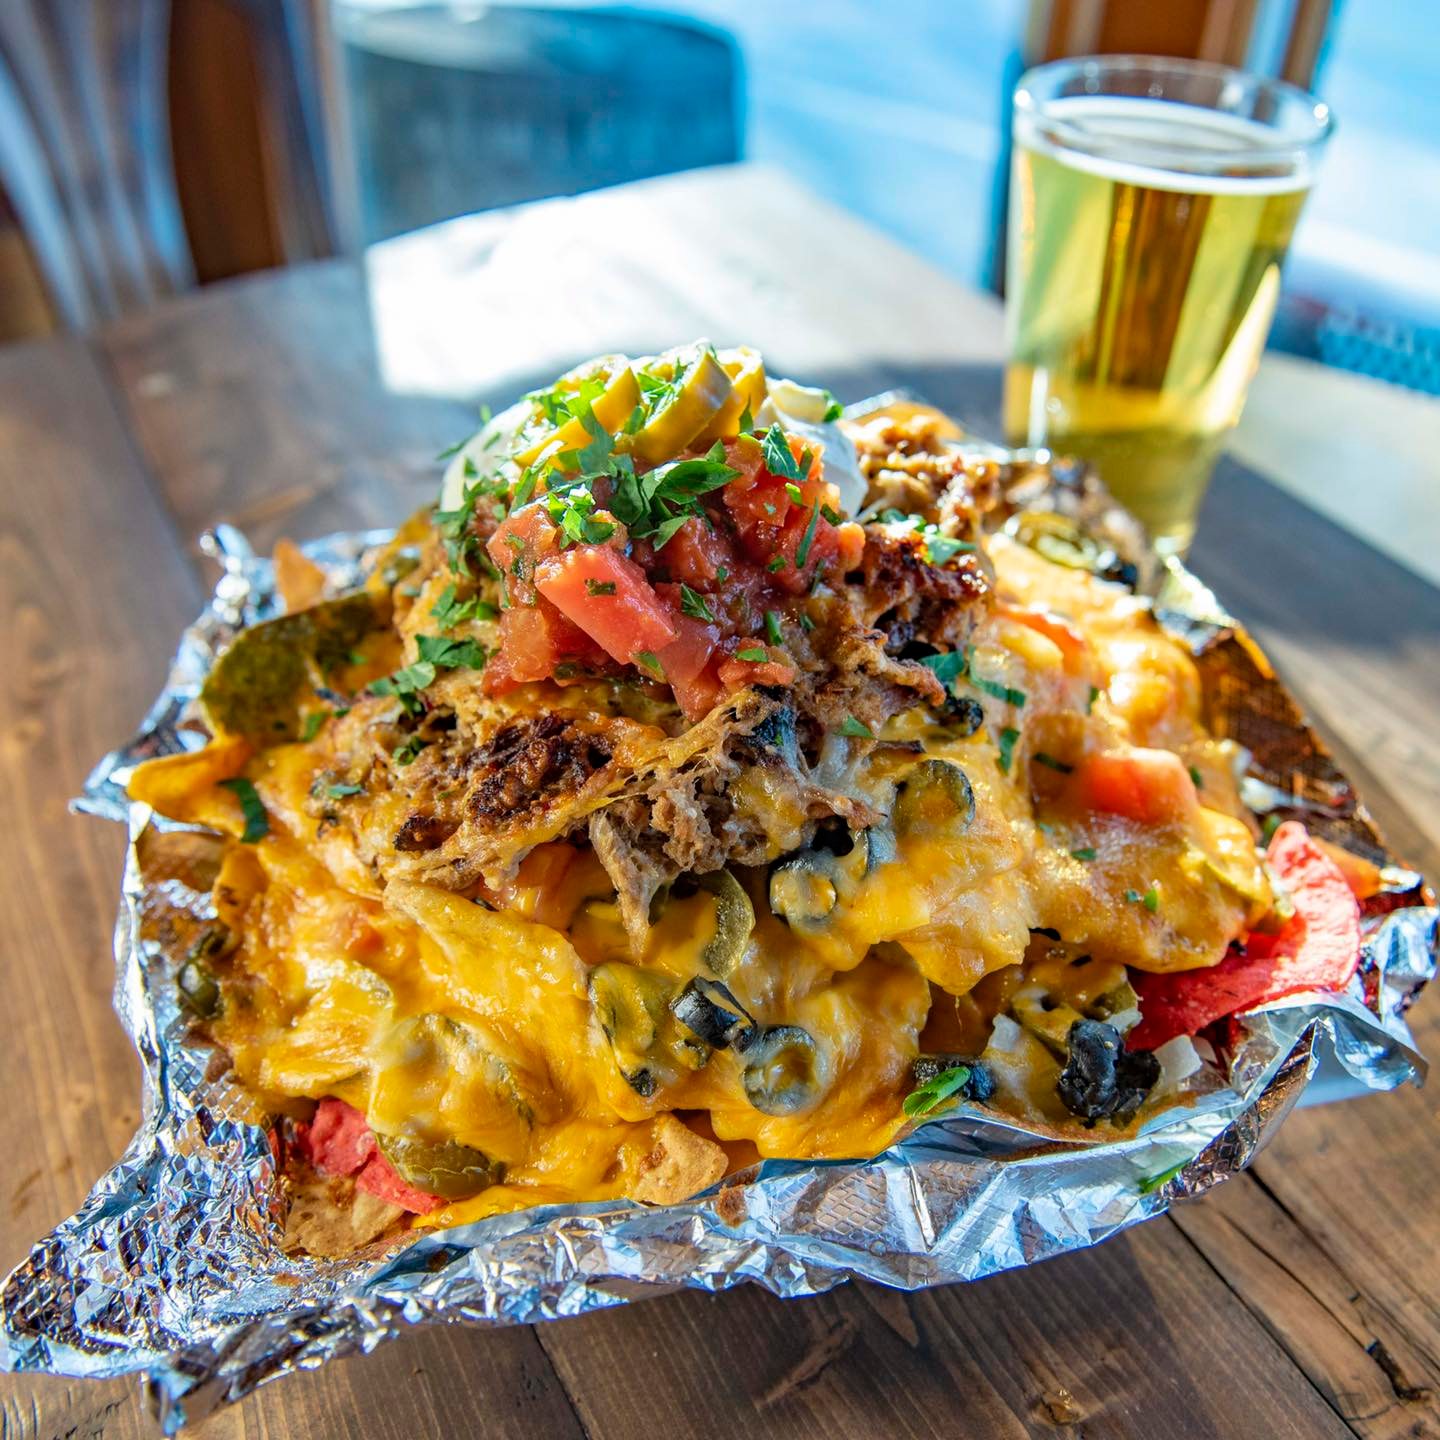 Nachos with a glass of beer